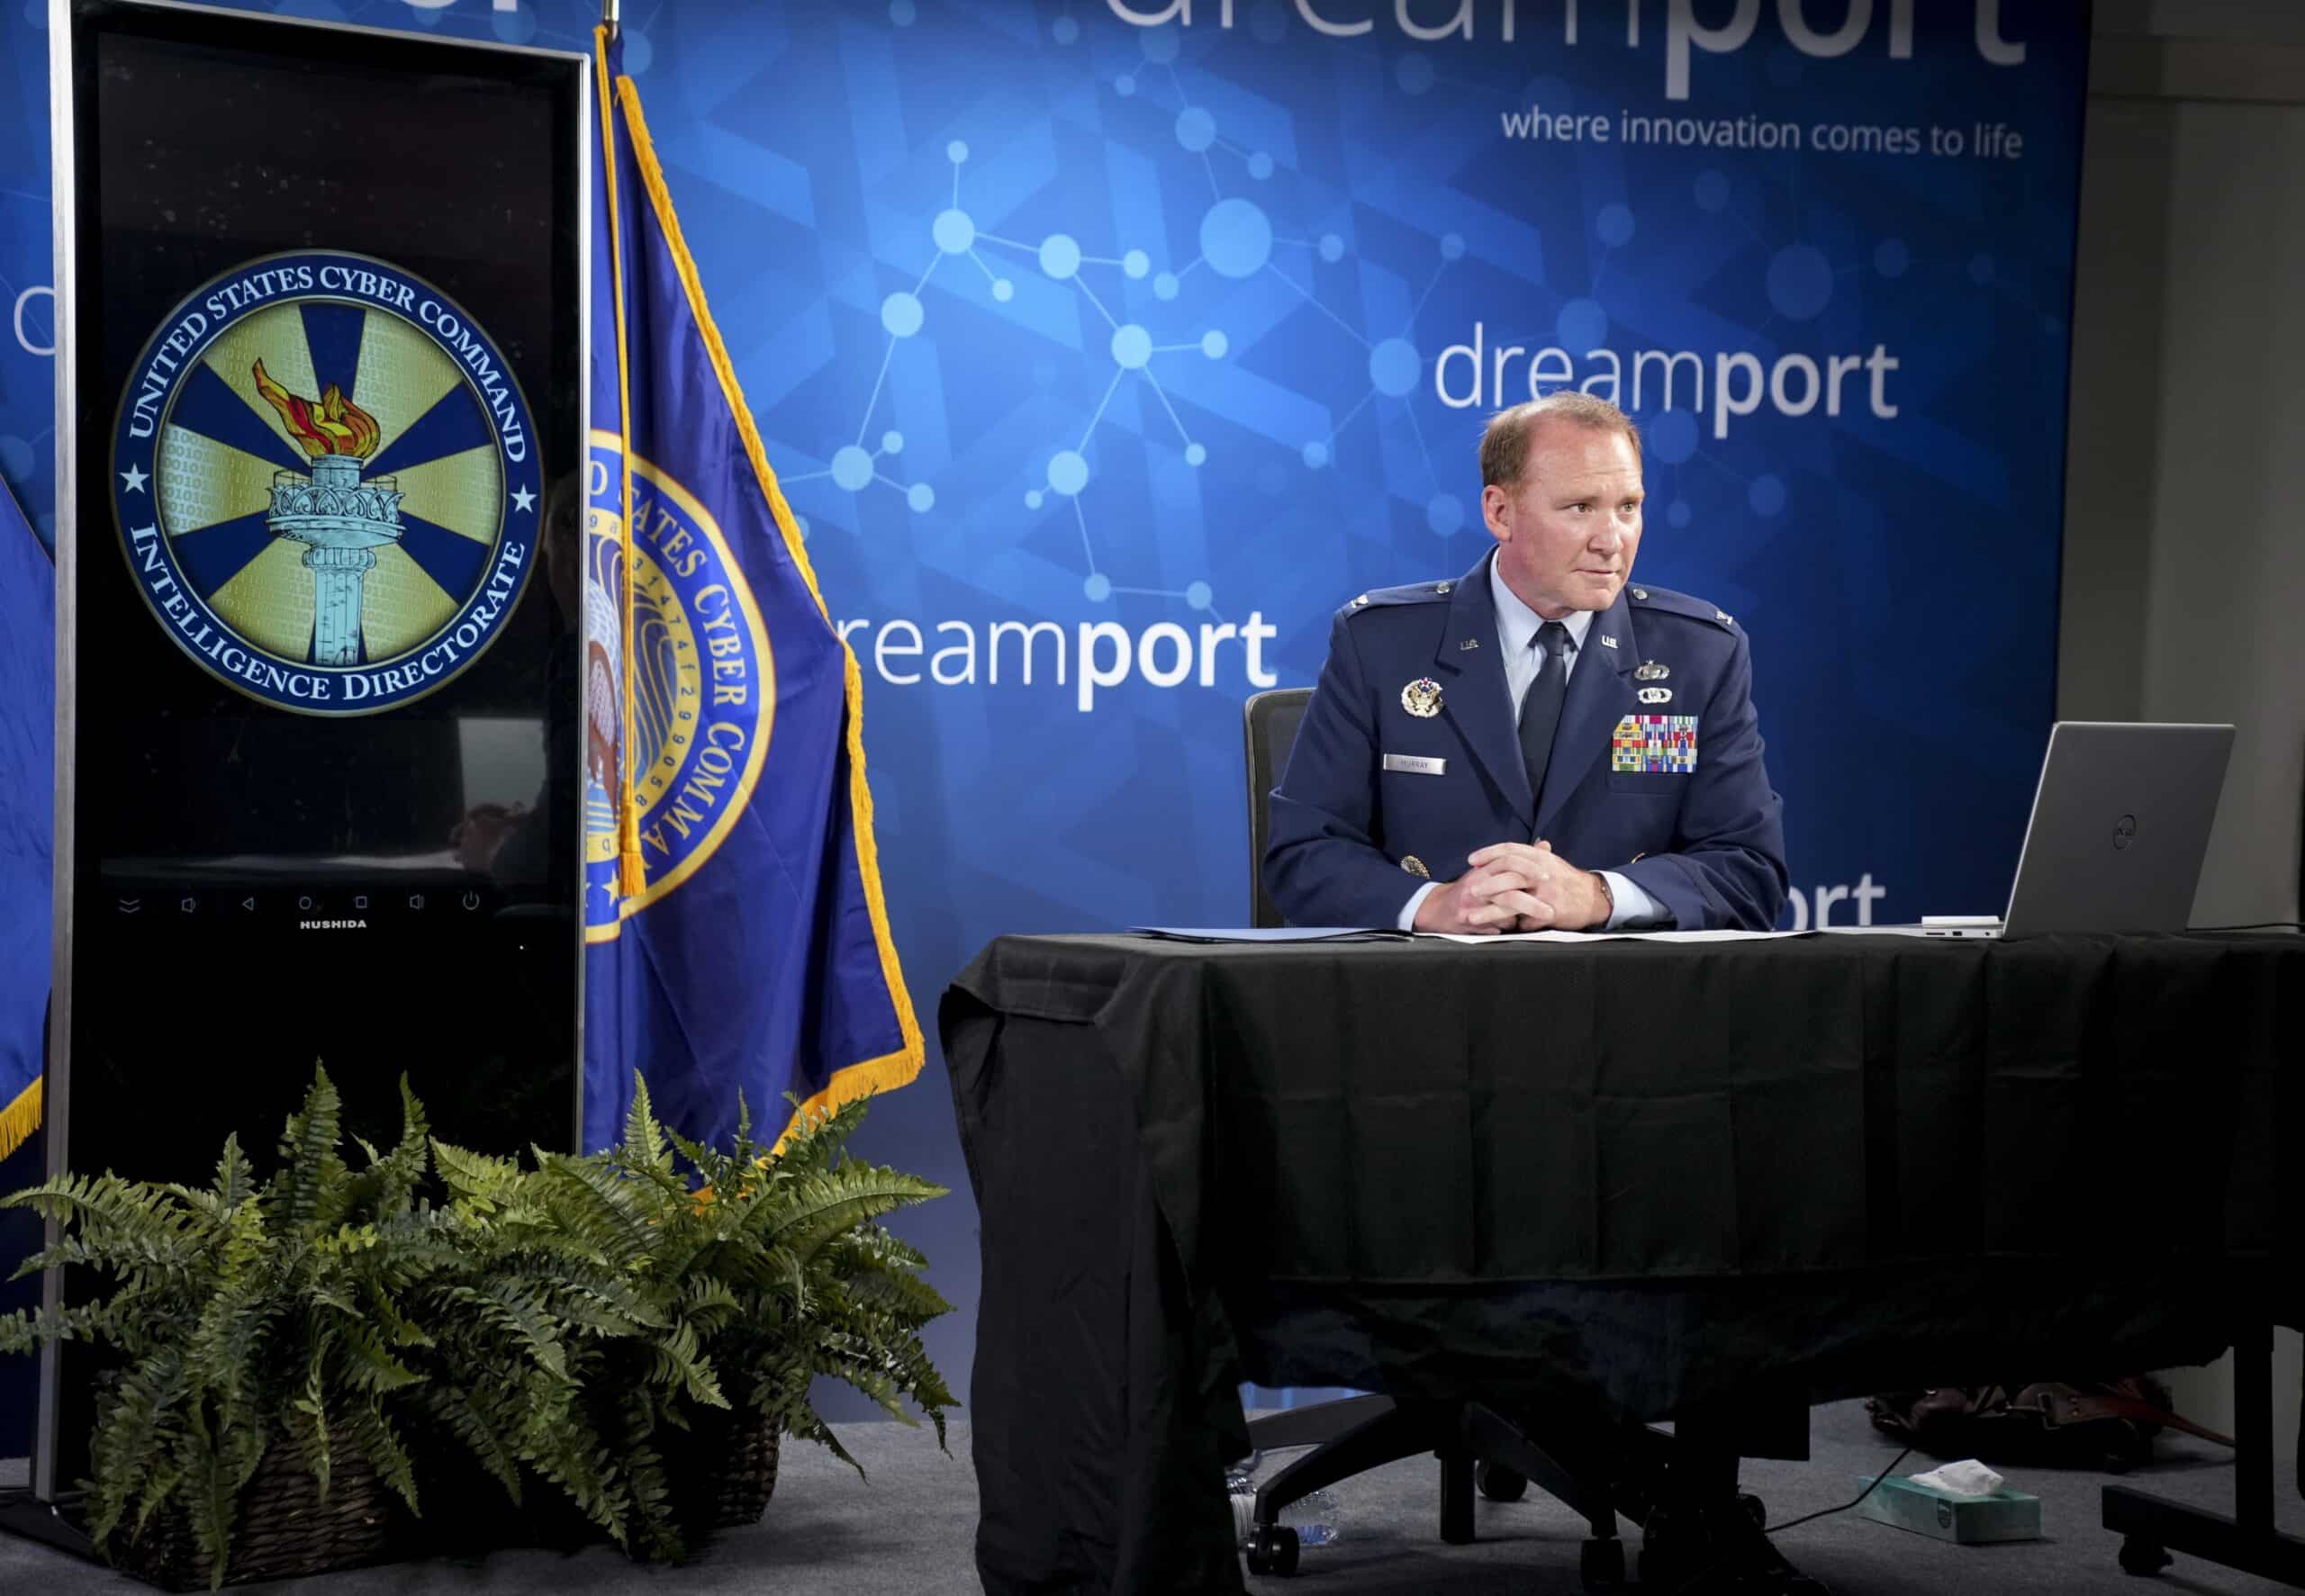 U.S. Cyber Command's mission is to direct, synchronize, and coordinate cyberspace planning and operations - to defend and advance national interests - in collaboration with domestic and international partners.